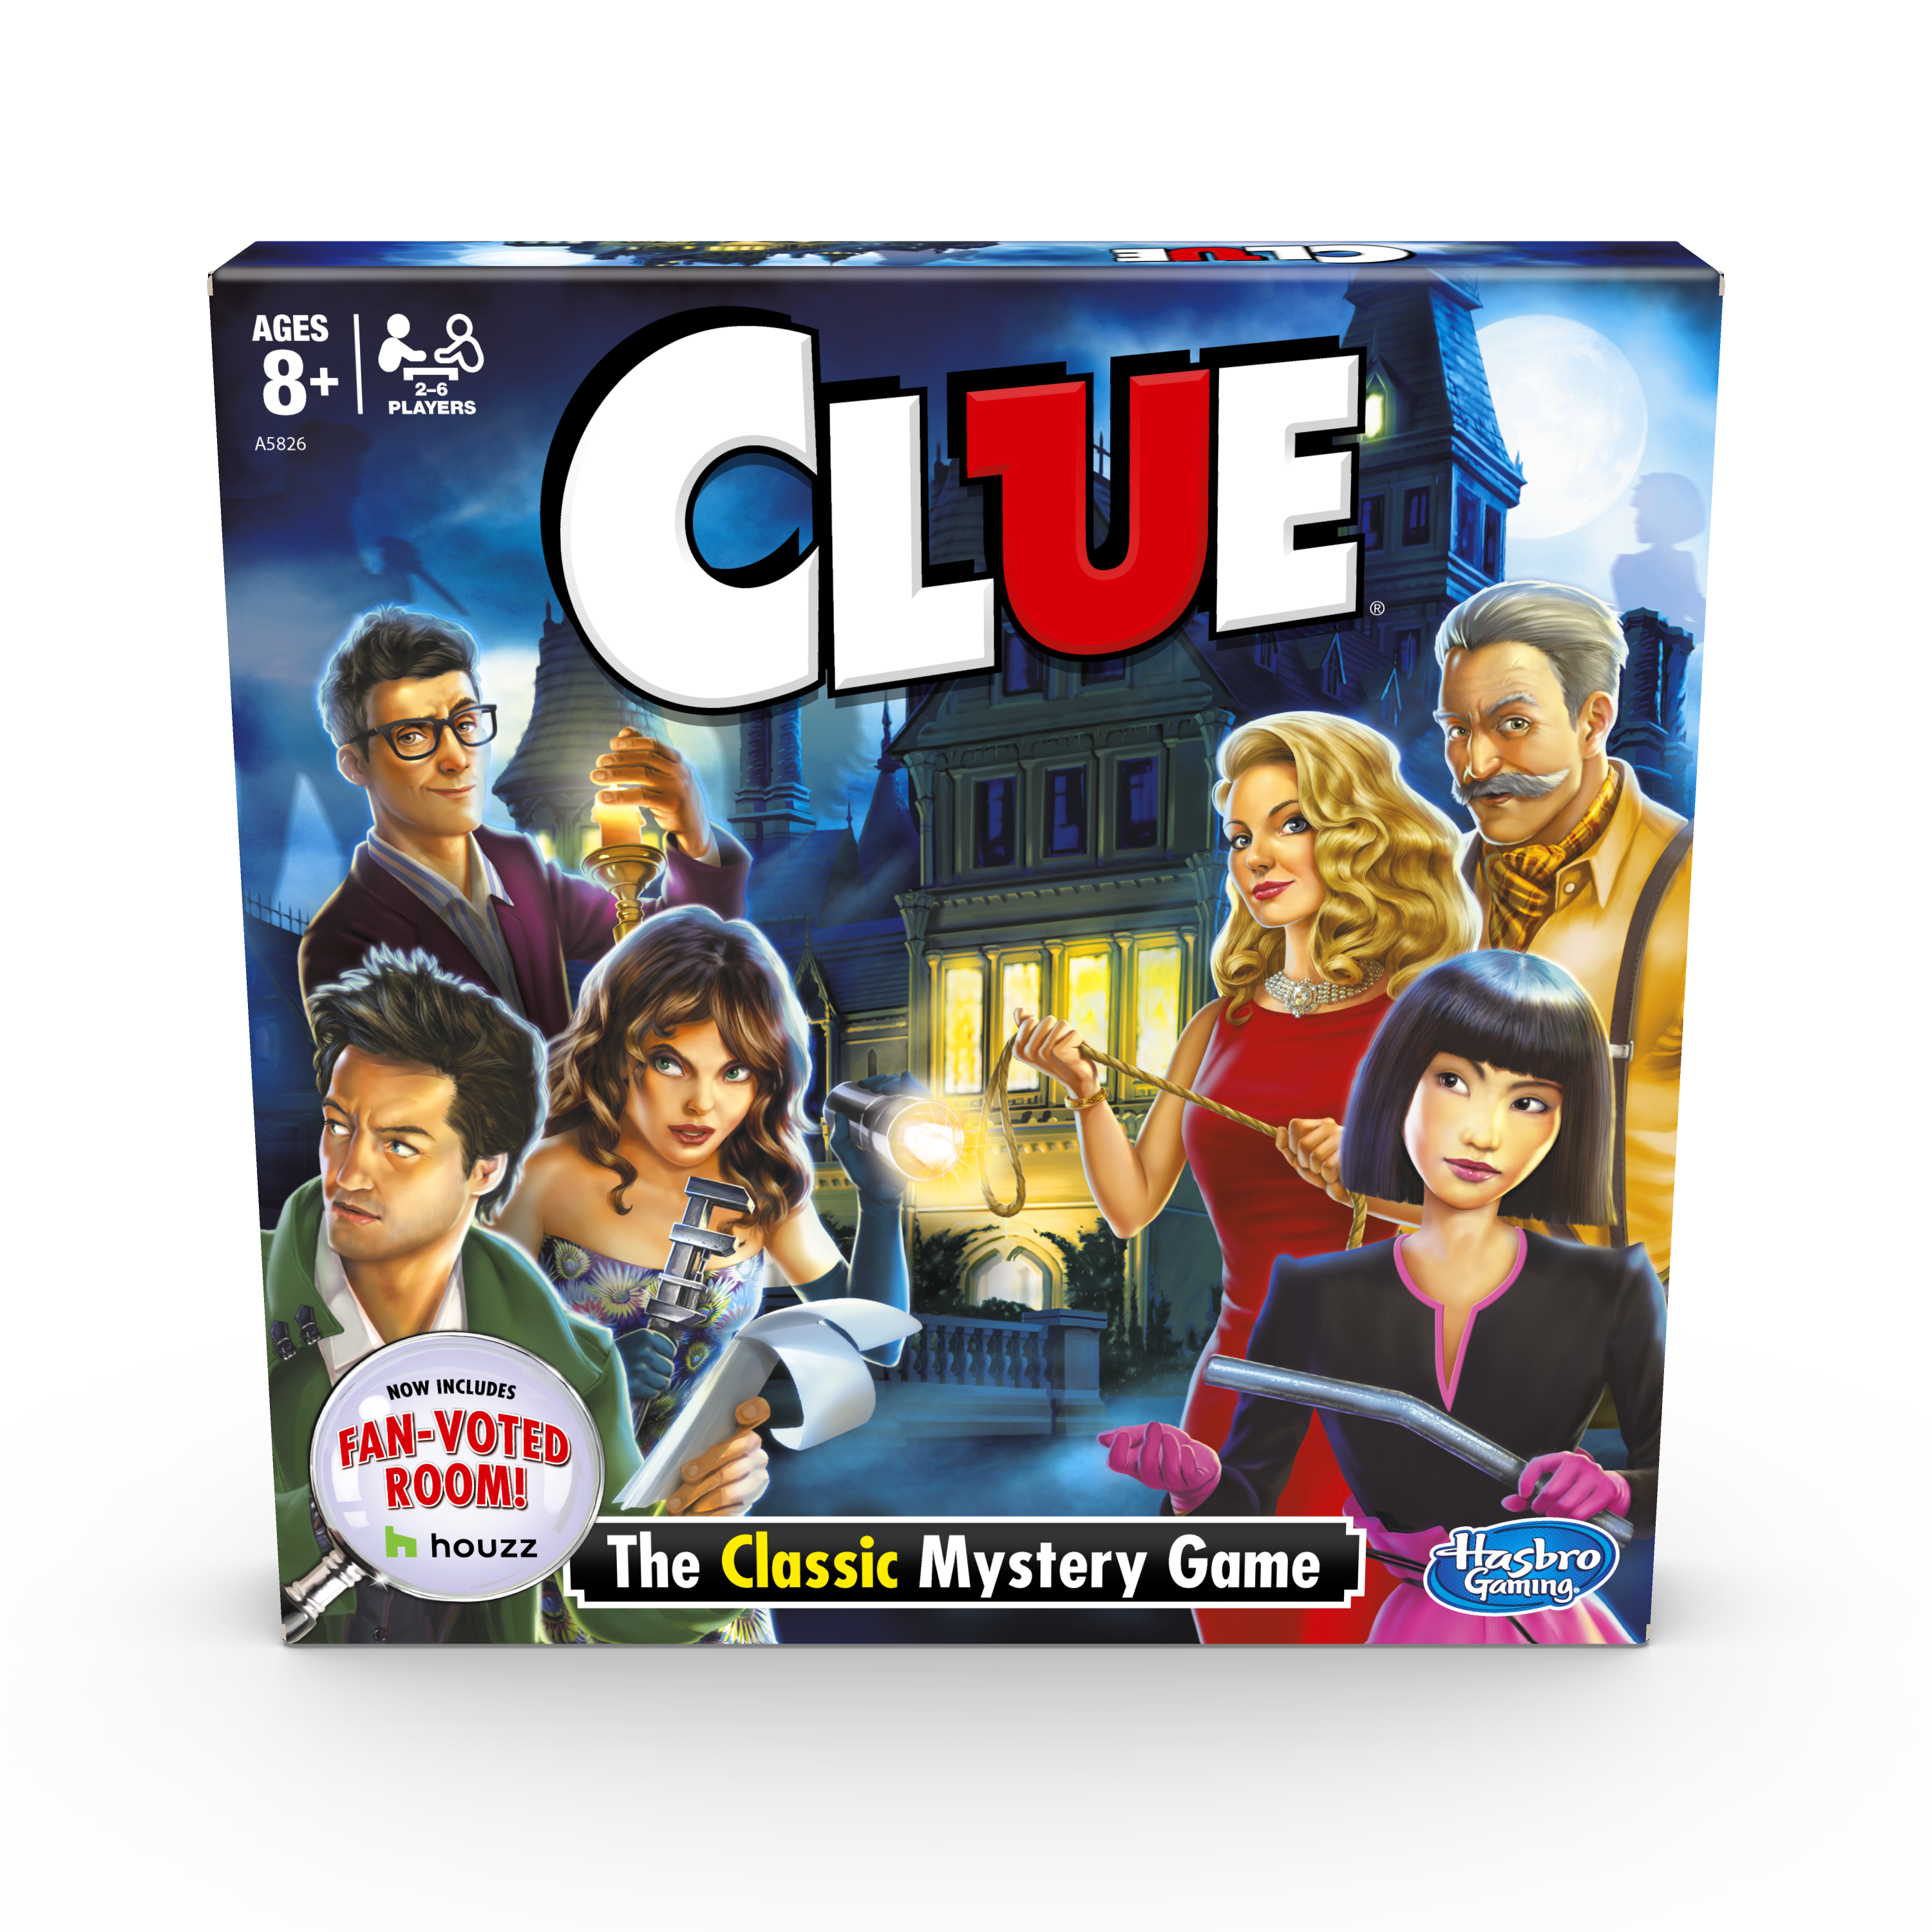 A5826 Clue double-sided board pad